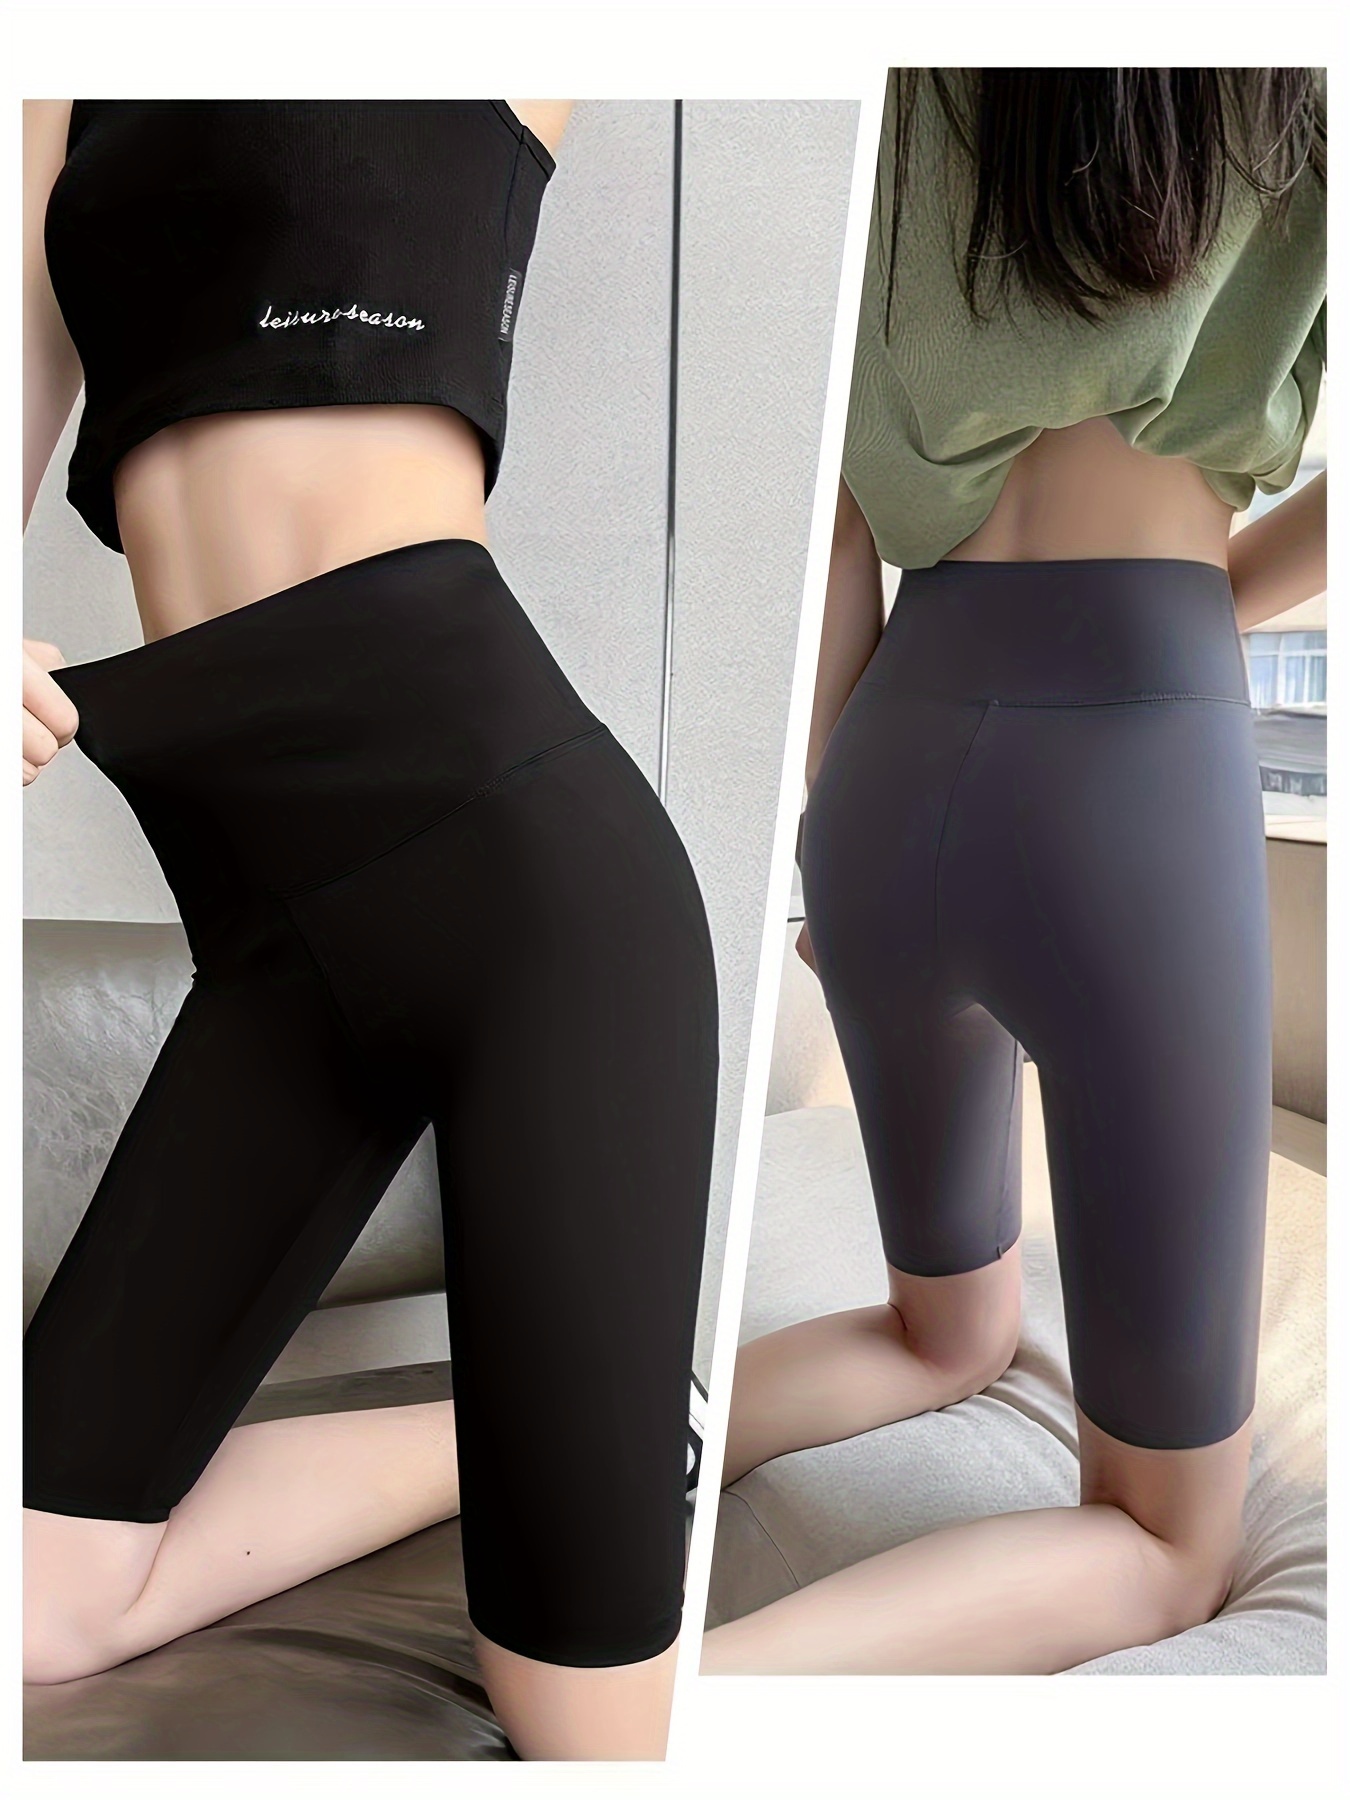 Teen/Kid Basic Leggings Tight Fit Booty Sports Yoga Skinny Pants For Girls  Spring And Fall